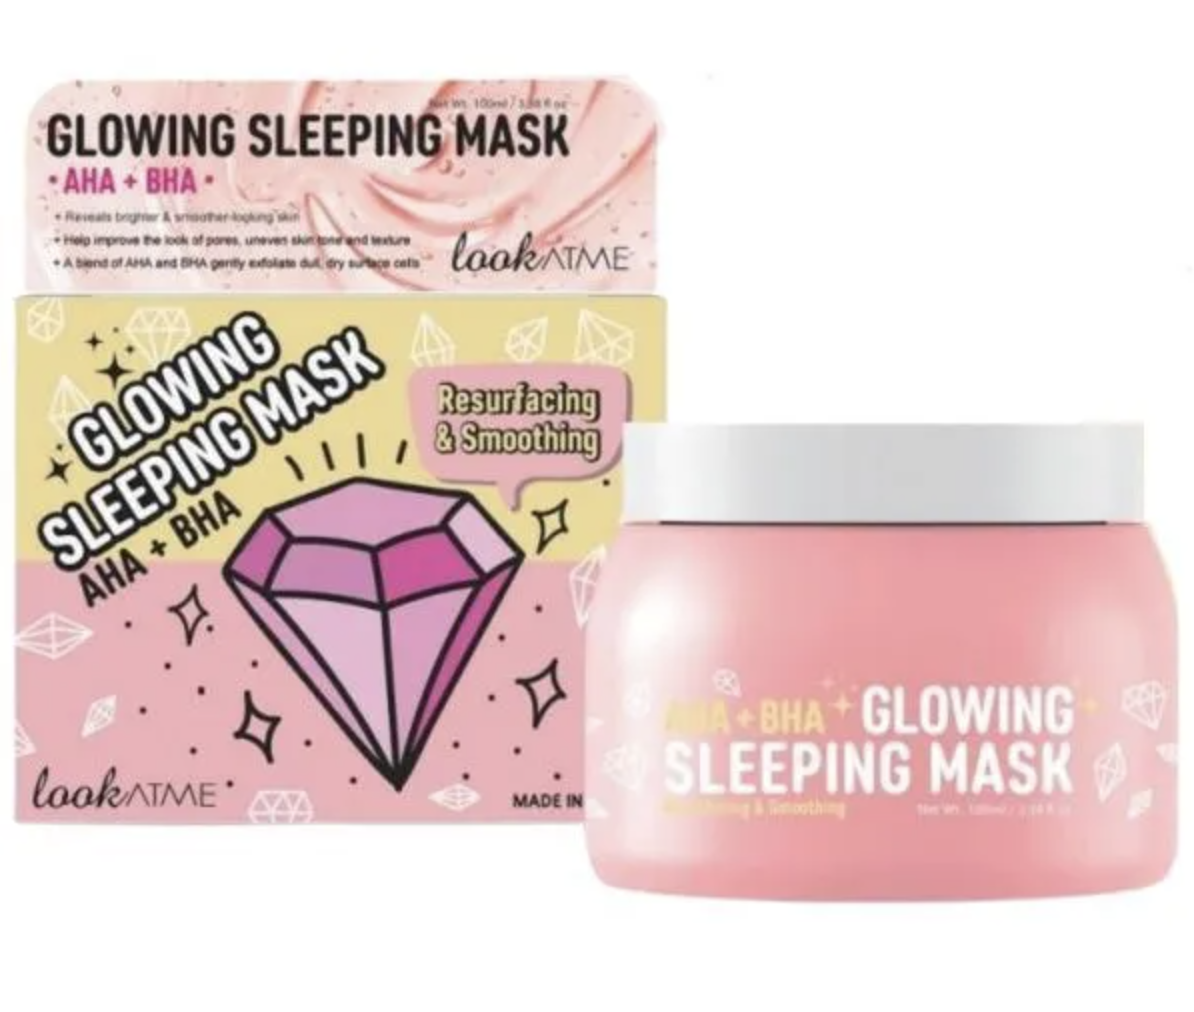 Look At Me Glowing Sleeping Mask with AHA and BHA